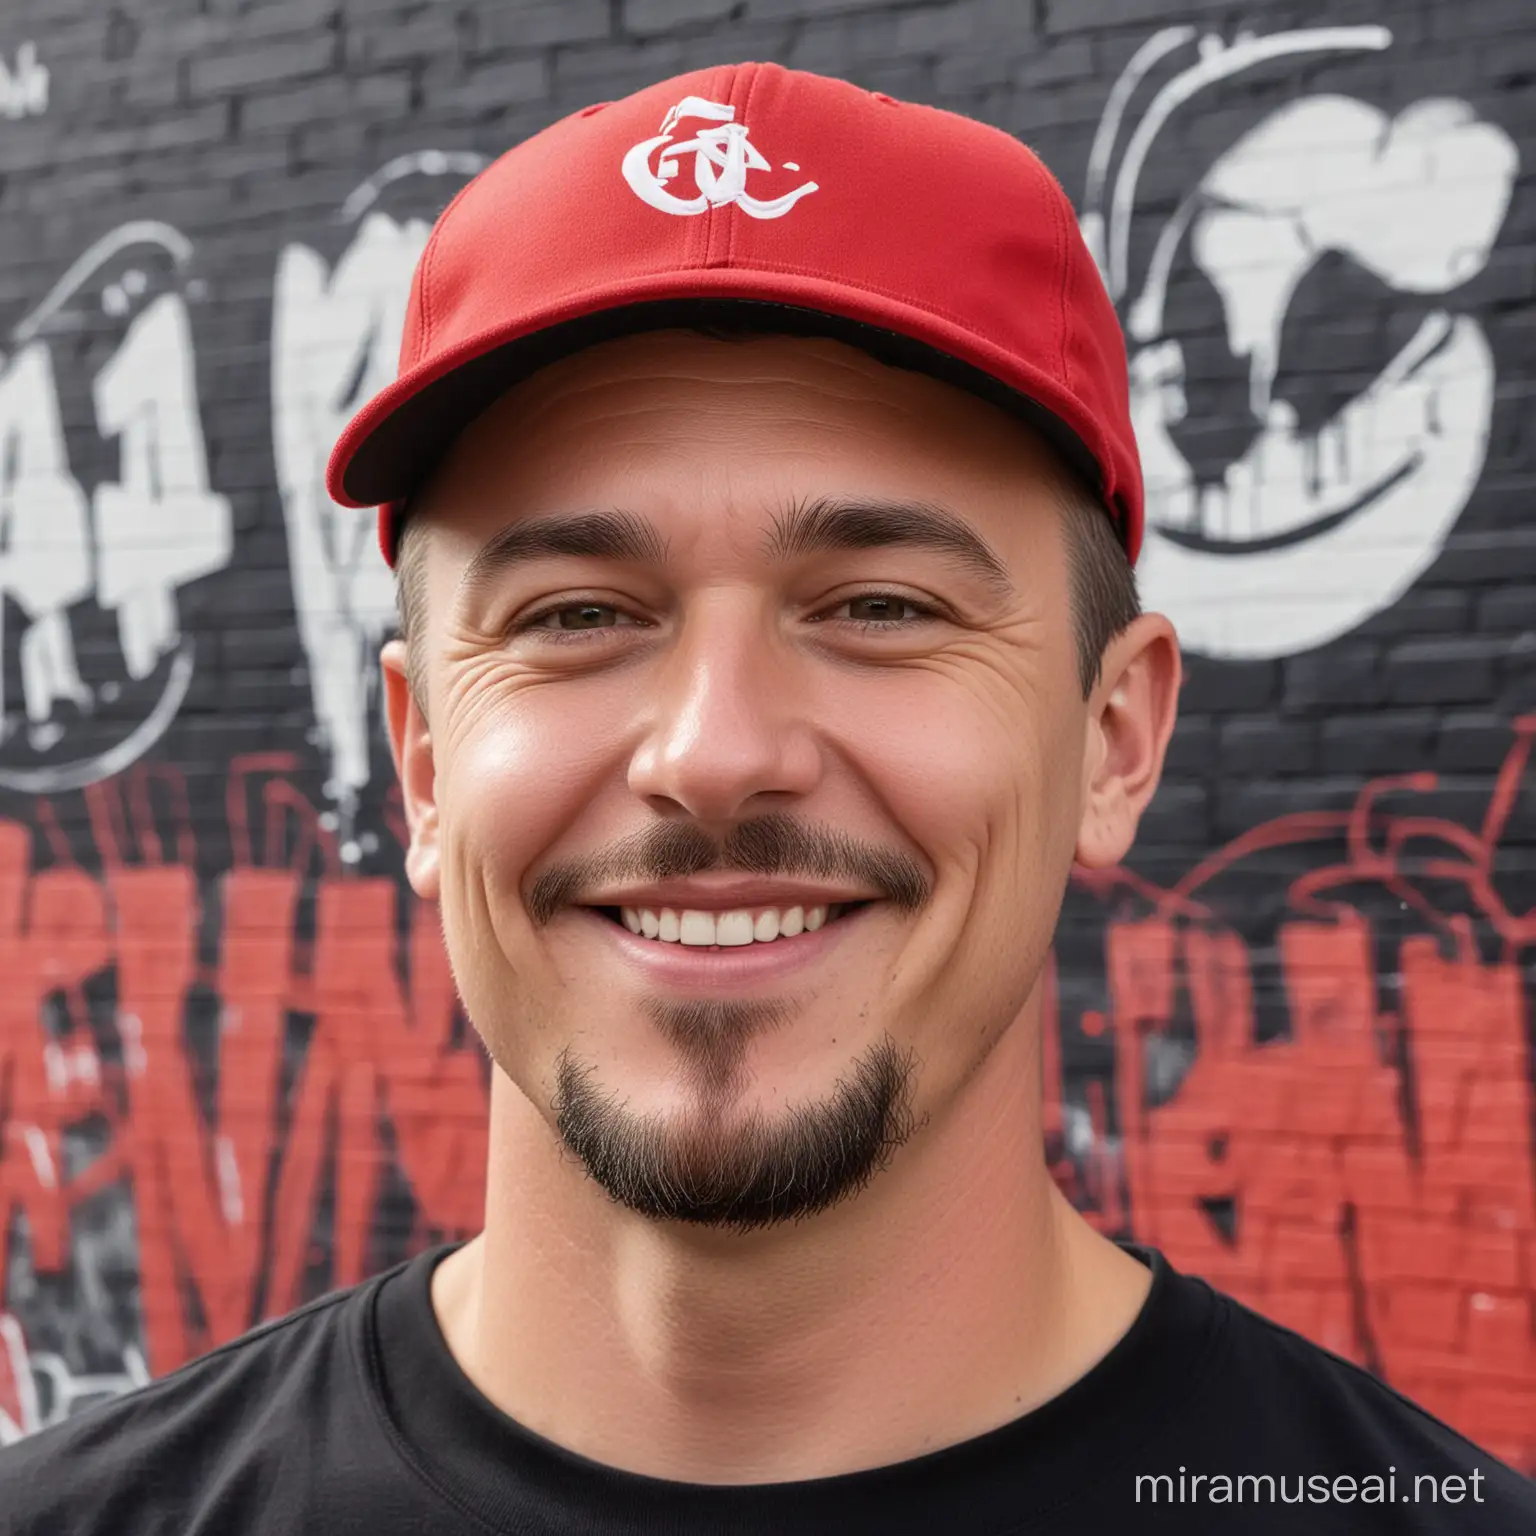 Smiling Man with Goatee in Red TShirt and Black Baseball Cap against City Graffiti Mural